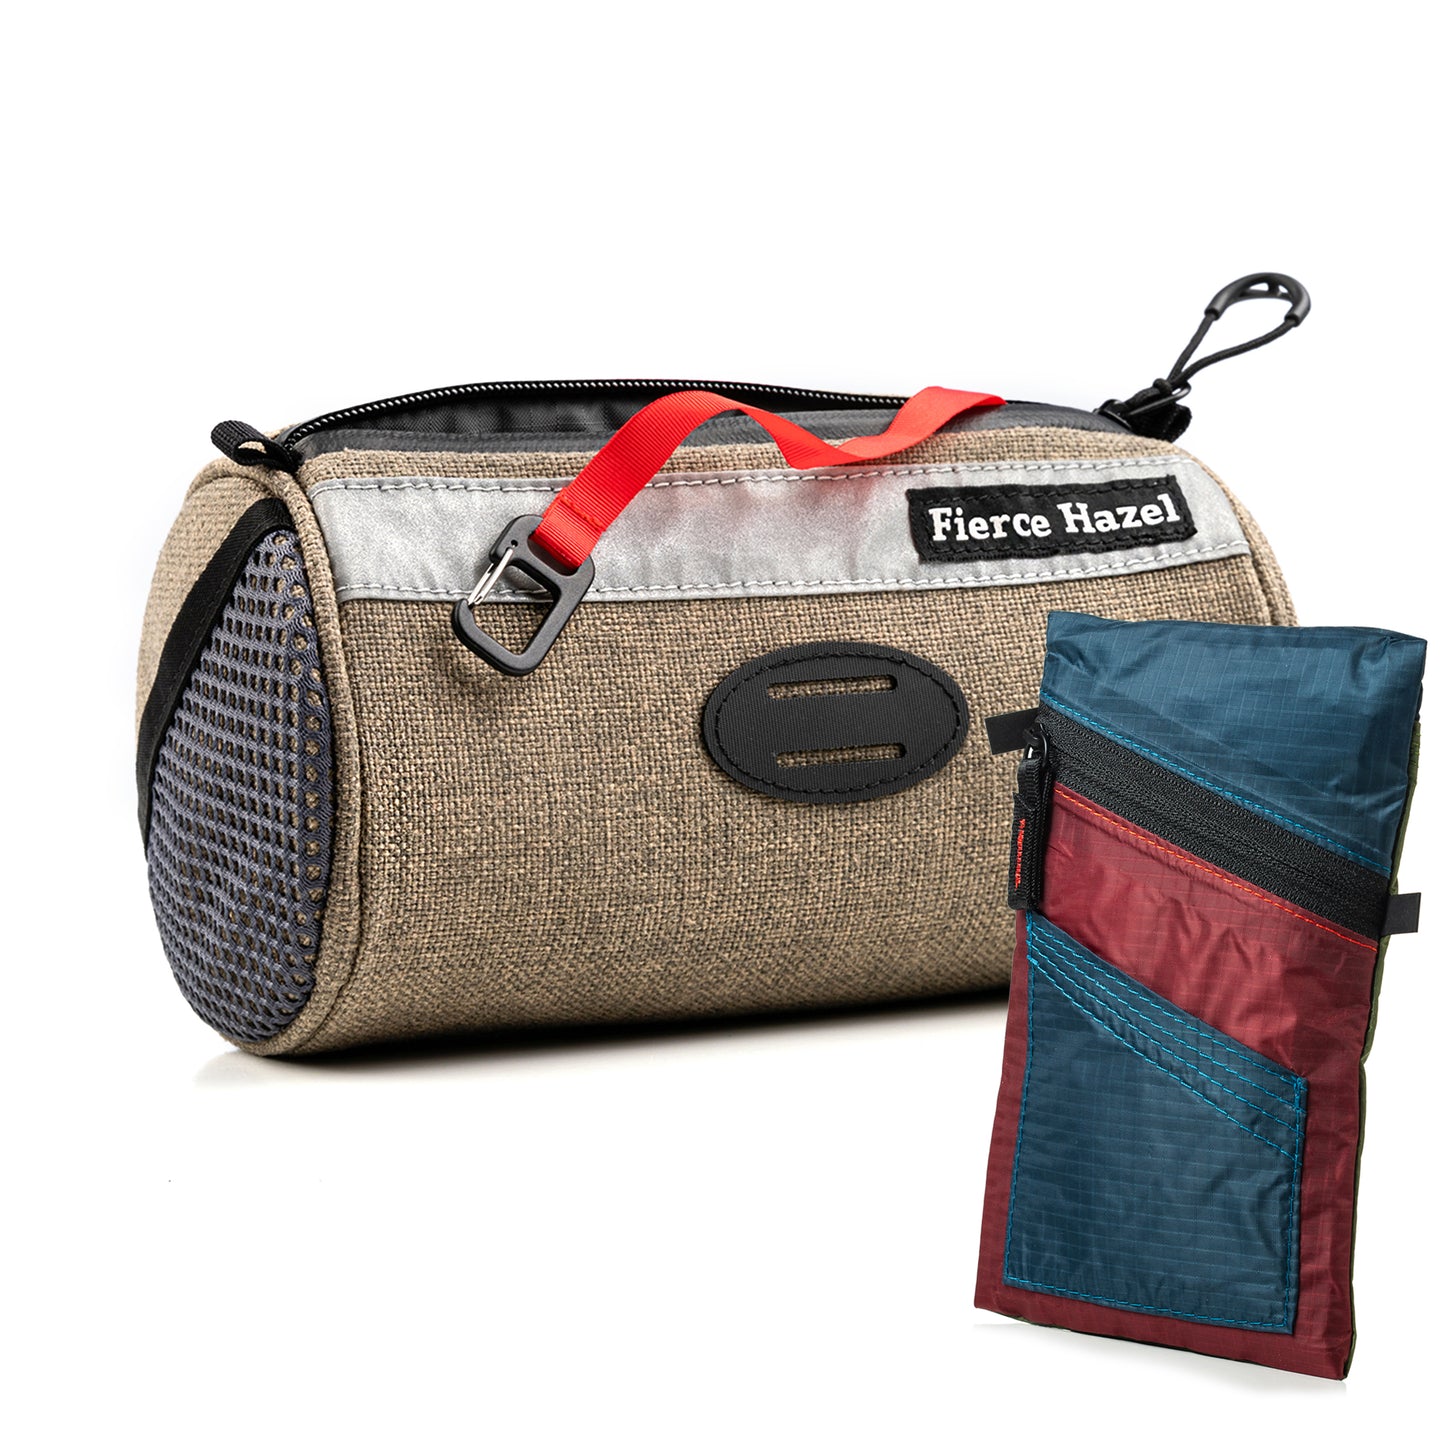 Featherweight Pouch with True Grit Handlebar Bag